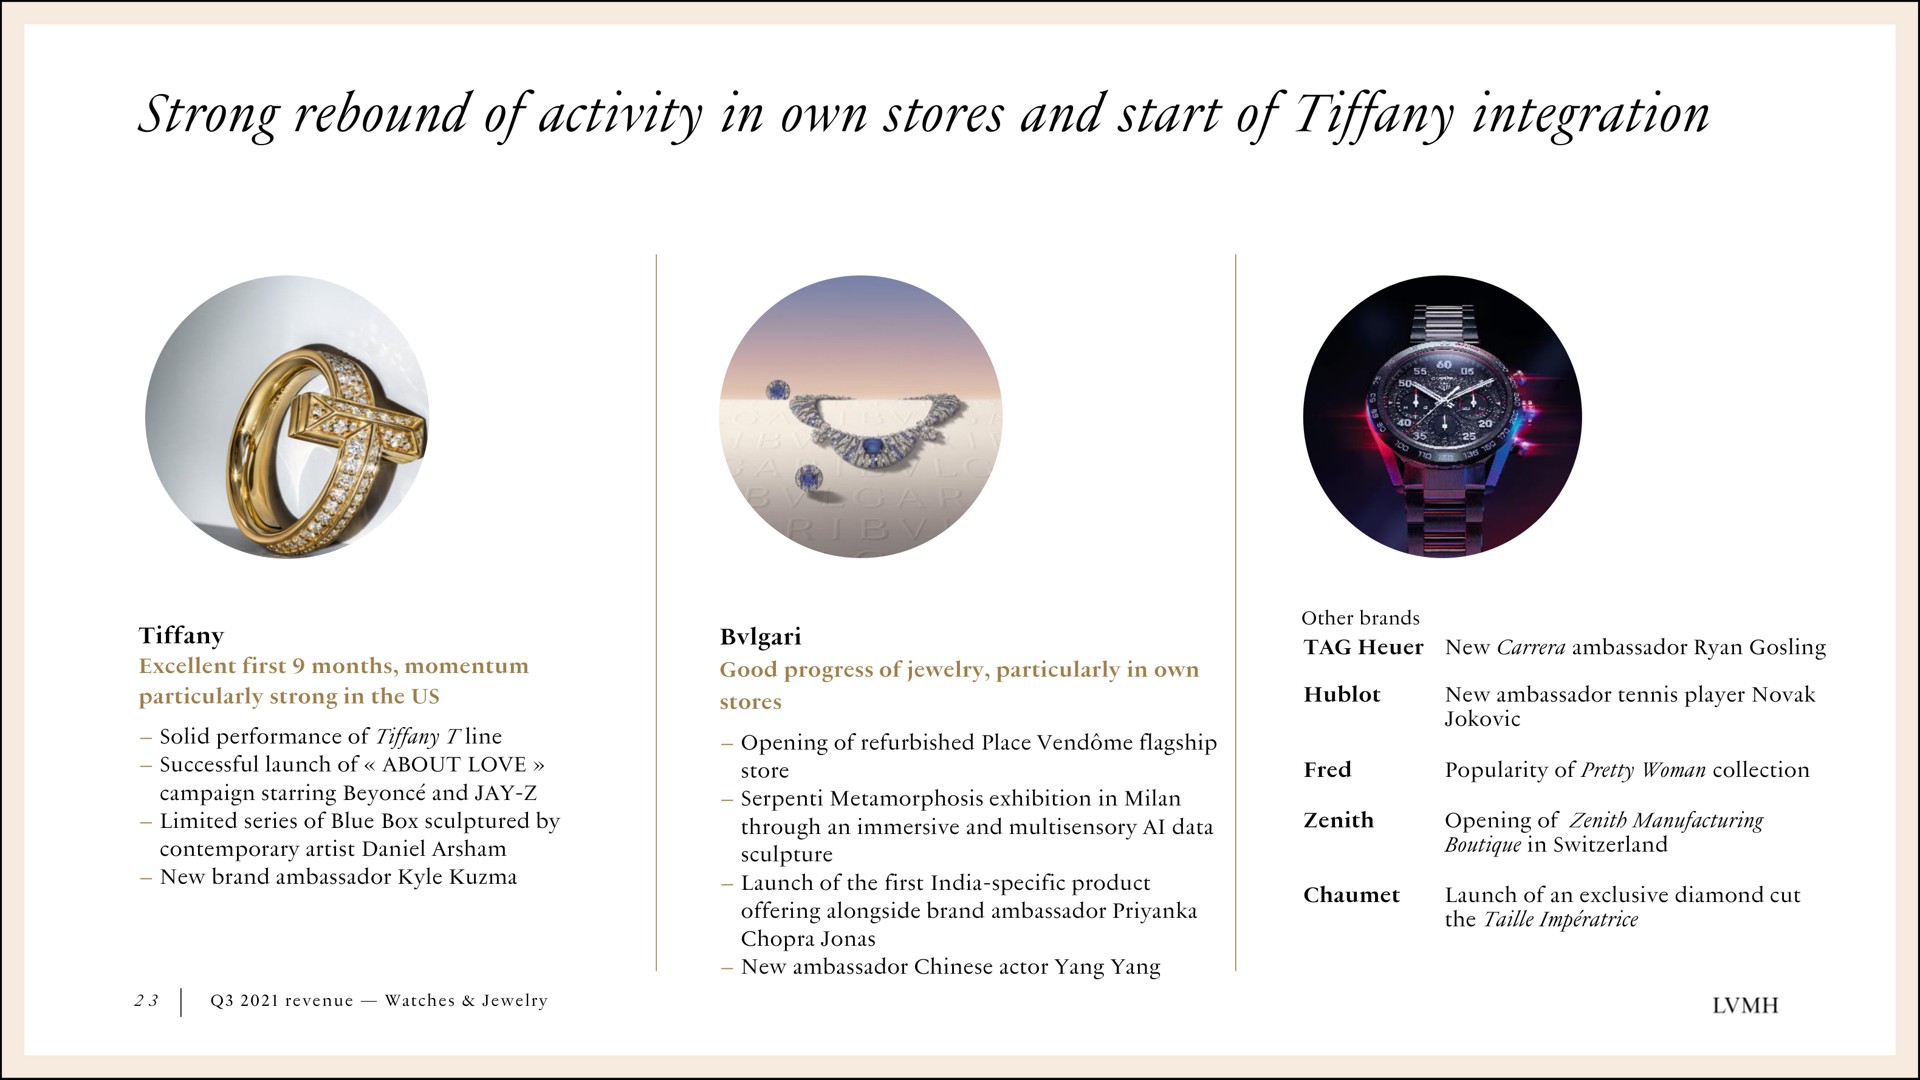 strong rebound of activity in own stores and start of tiffany integration | LVMH